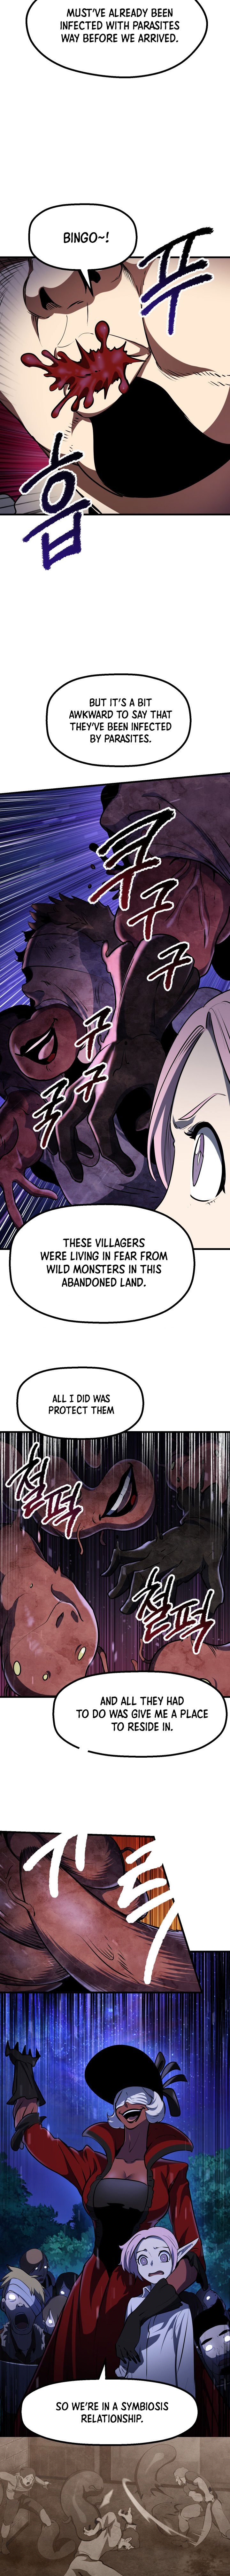 survival-story-of-a-sword-king-in-a-fantasy-world-chap-83-17